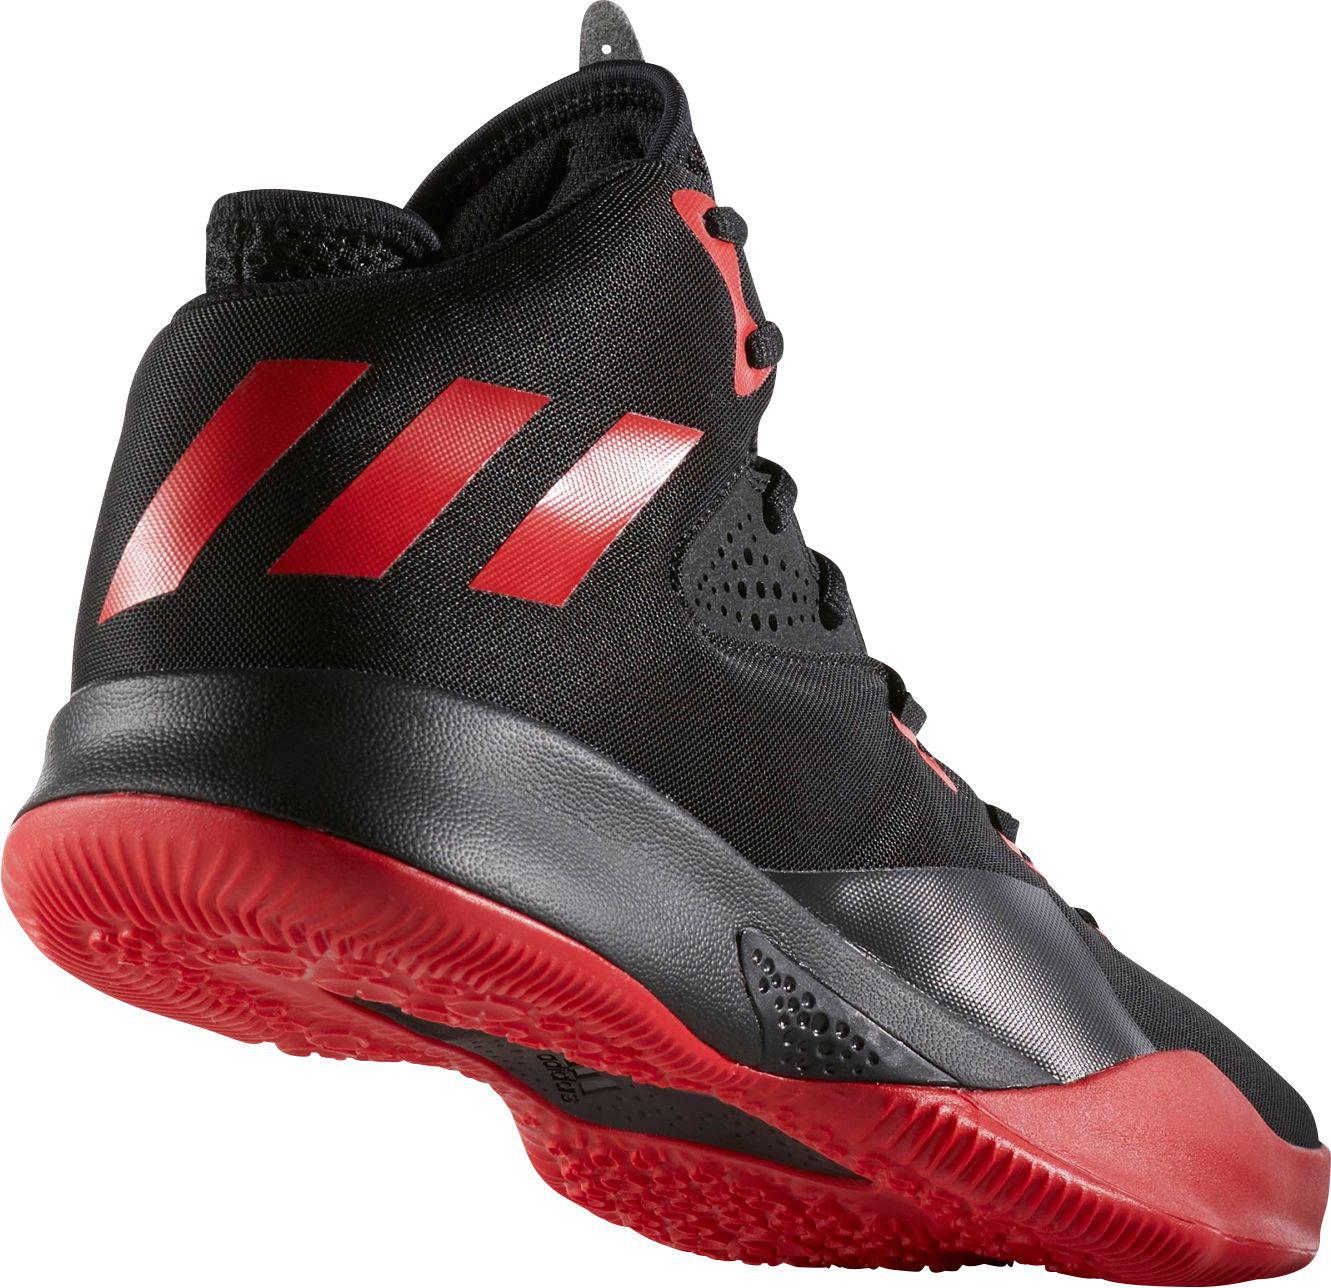 red and black adidas basketball shoes